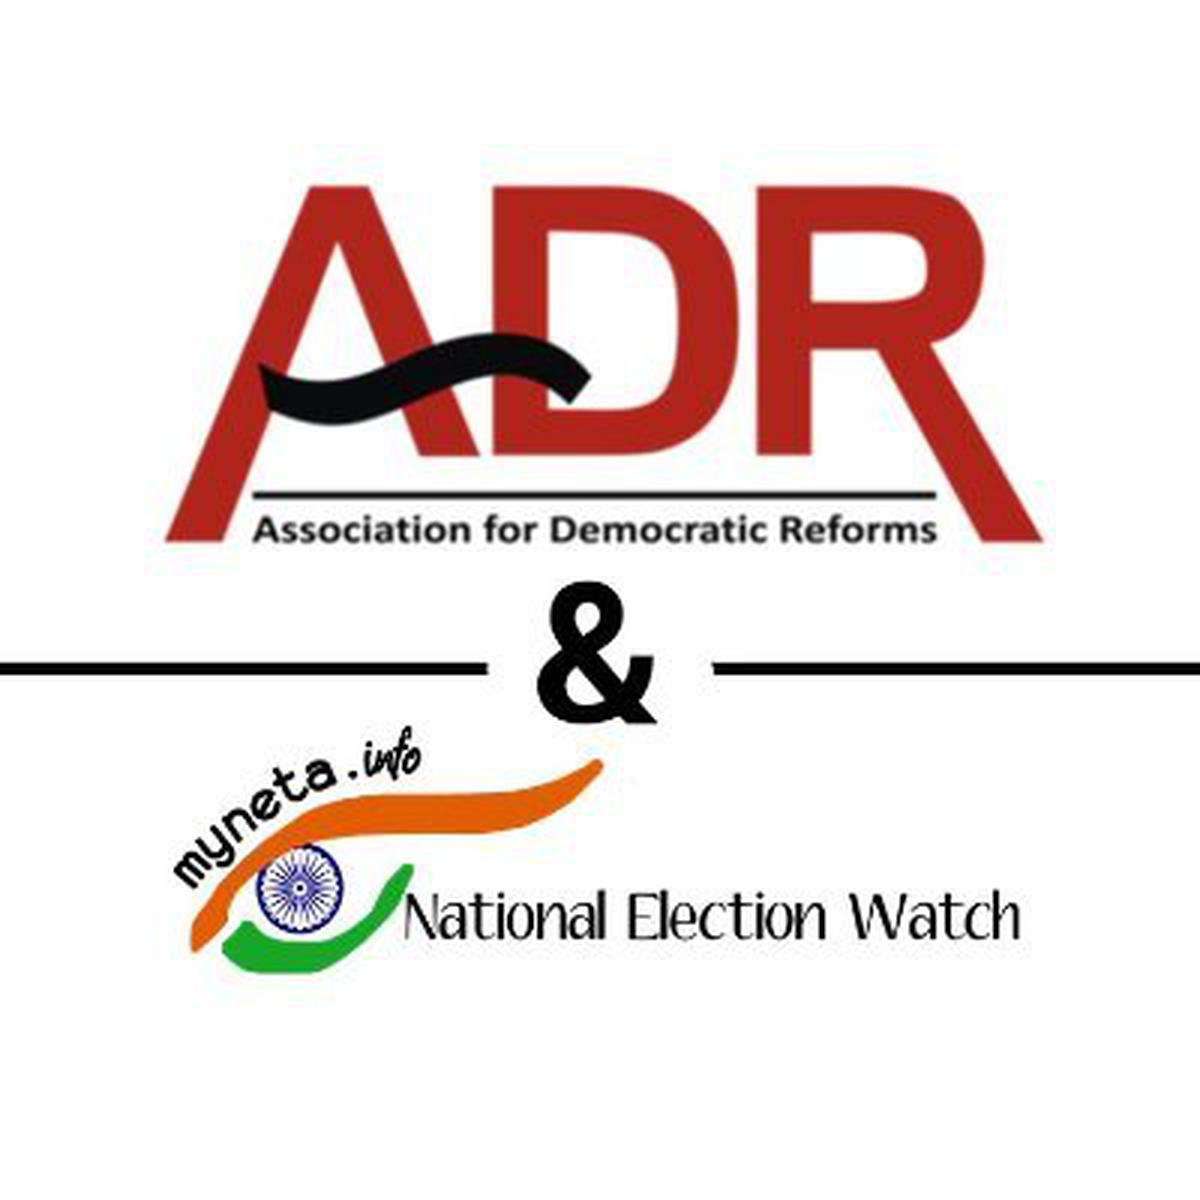 Assets of 89% of councillors re-contesting Delhi civic polls increased by 3% to 4,437%: ADR